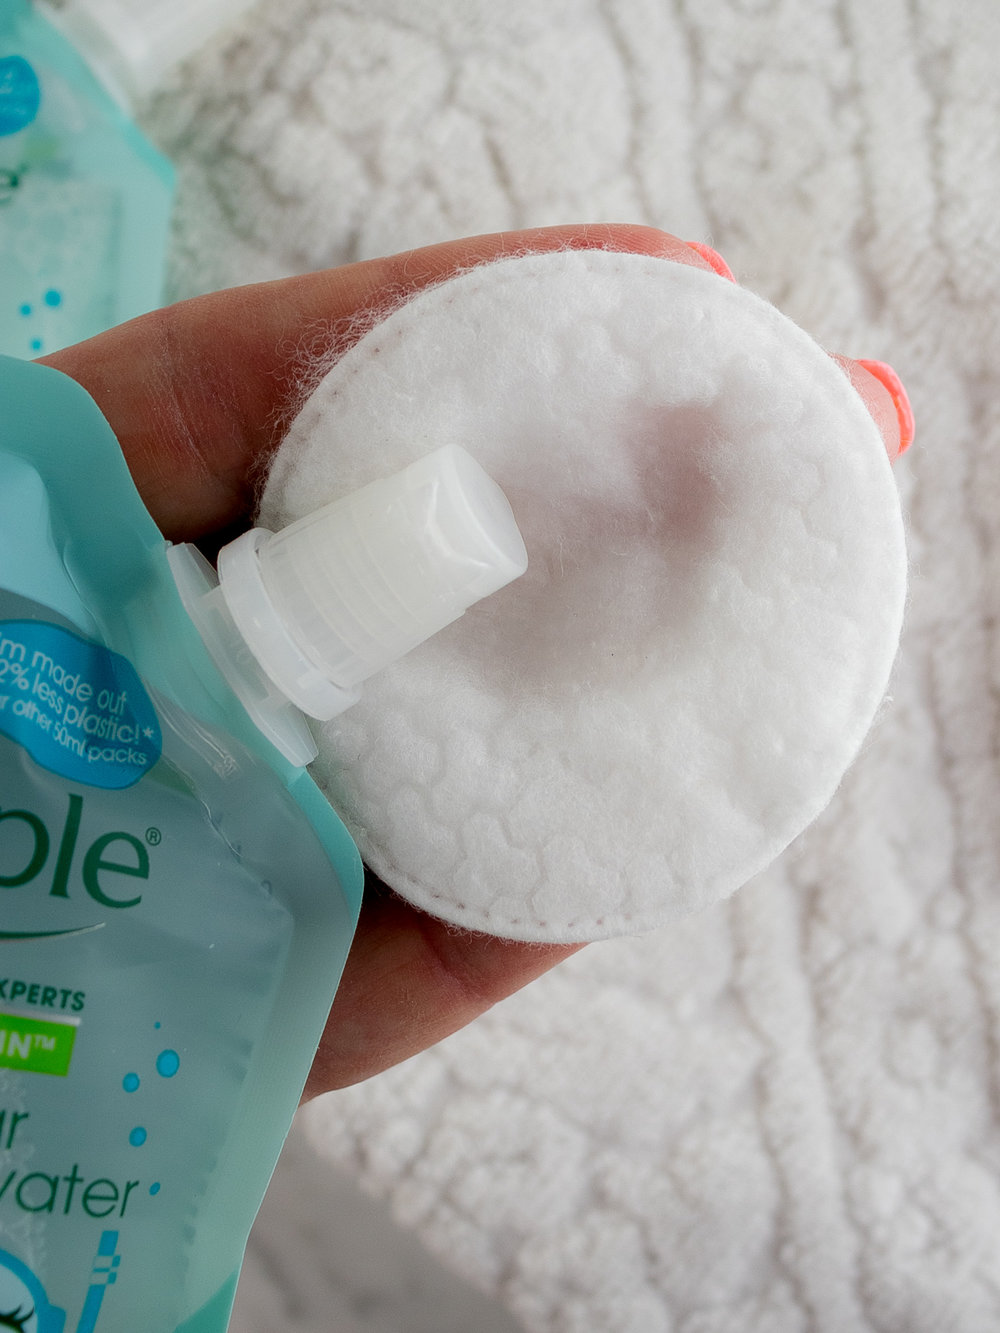 Simple Micellar Cleansing Water Sachet in Use on Cotton Round